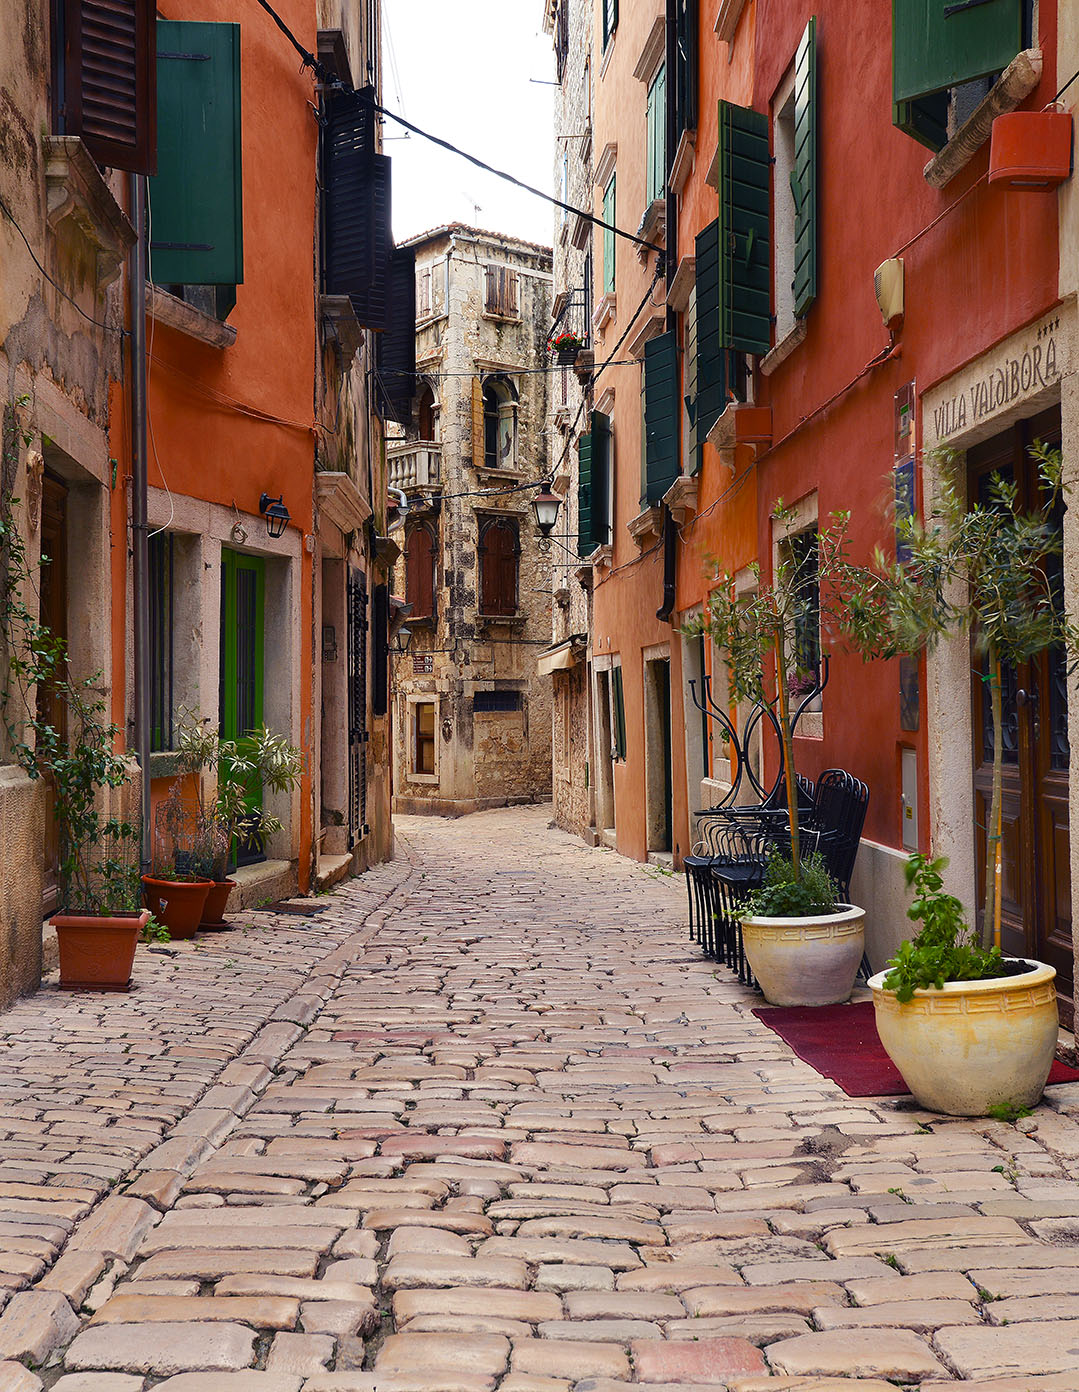 The historic district of Rovinj feels just as Italian is Croatian with its cobbled streets and colorful buildings.